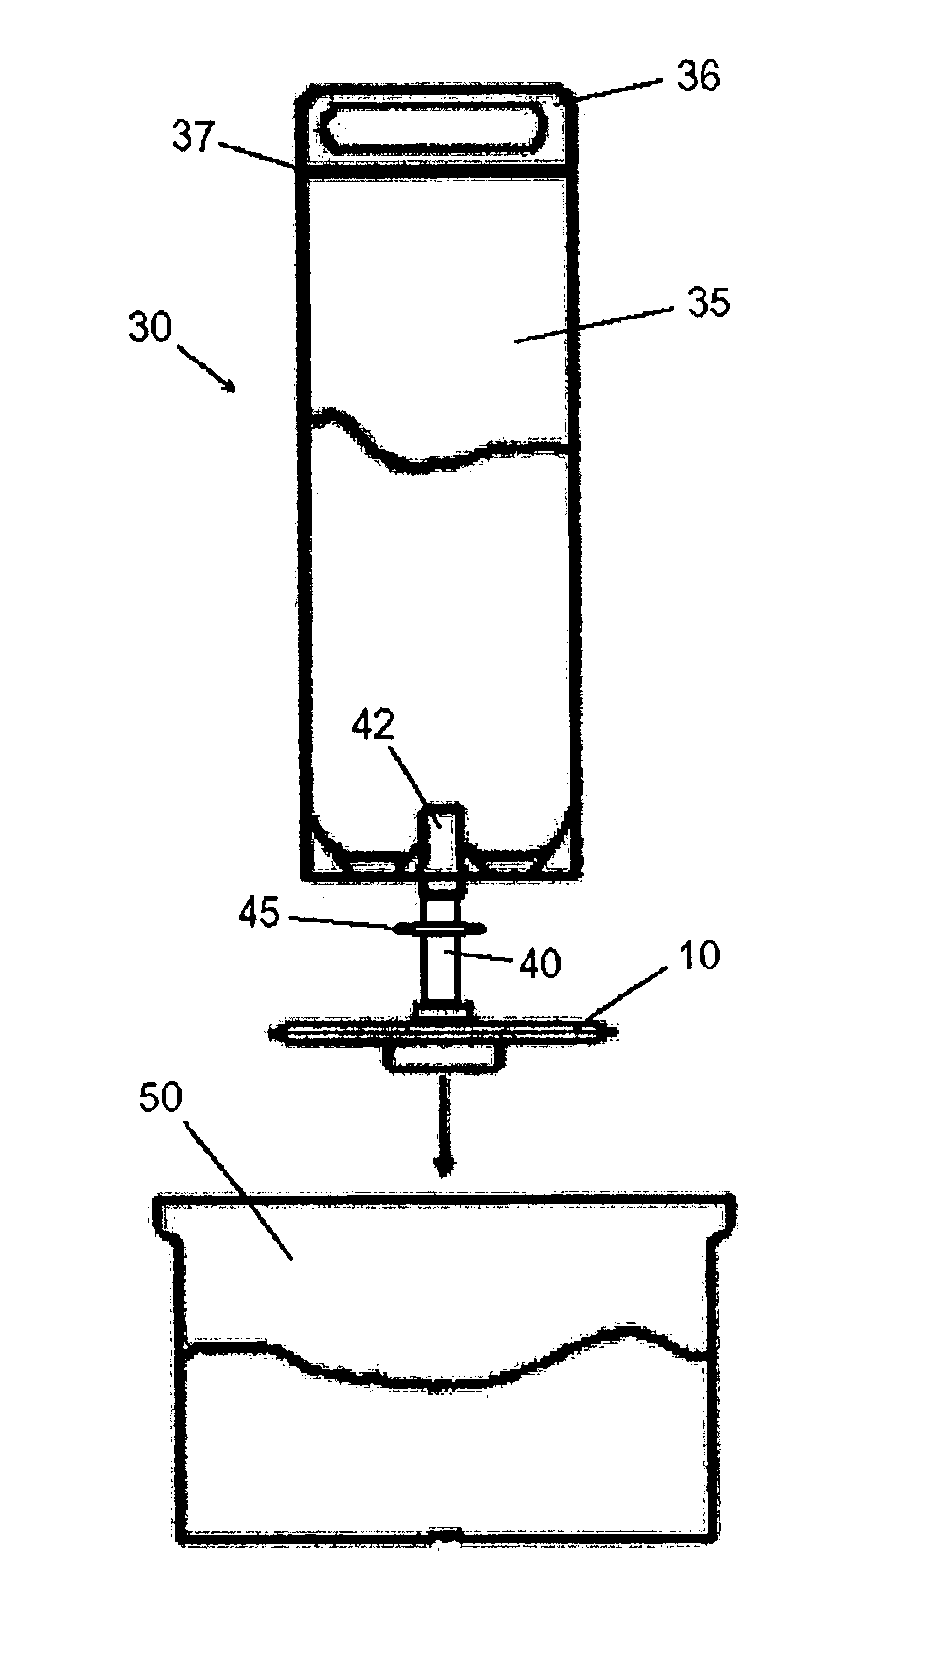 Microporous filter media, filteration systems containing same, and methods of making and using